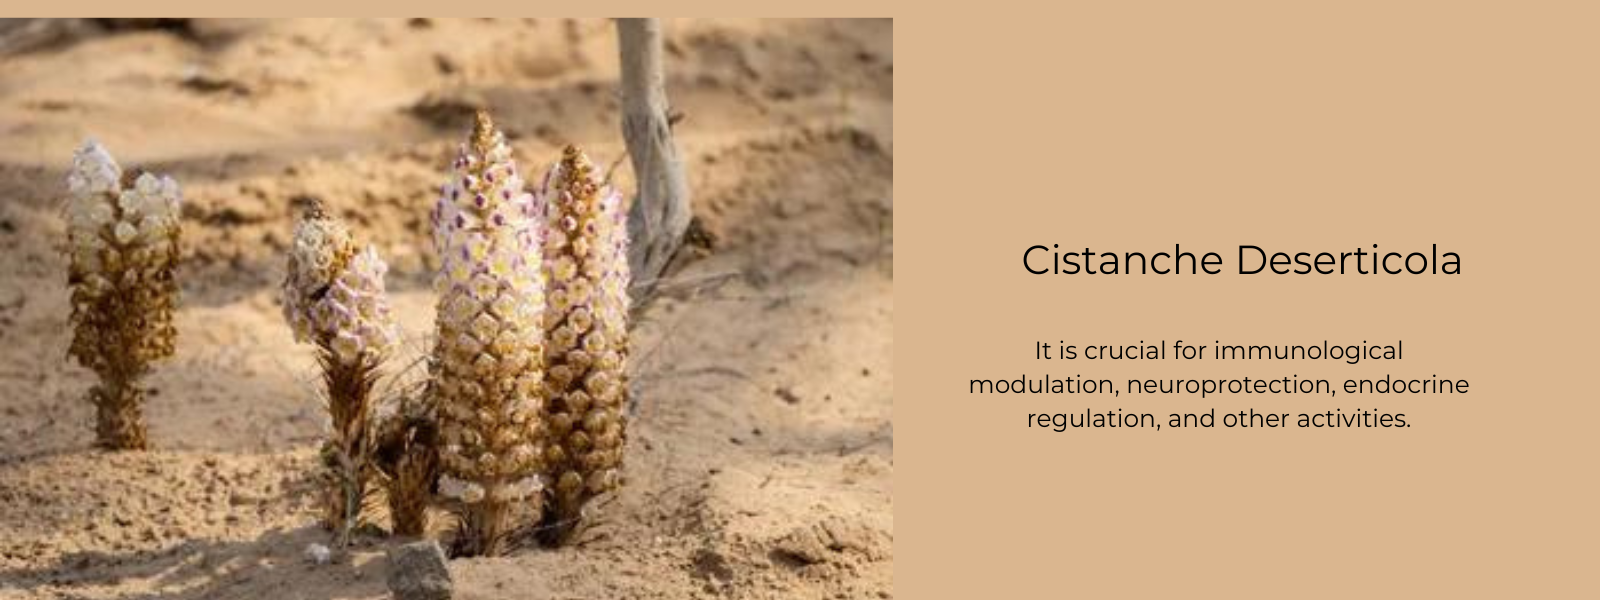 Cistanche Deserticola - Health Benefits, Uses and Important Facts